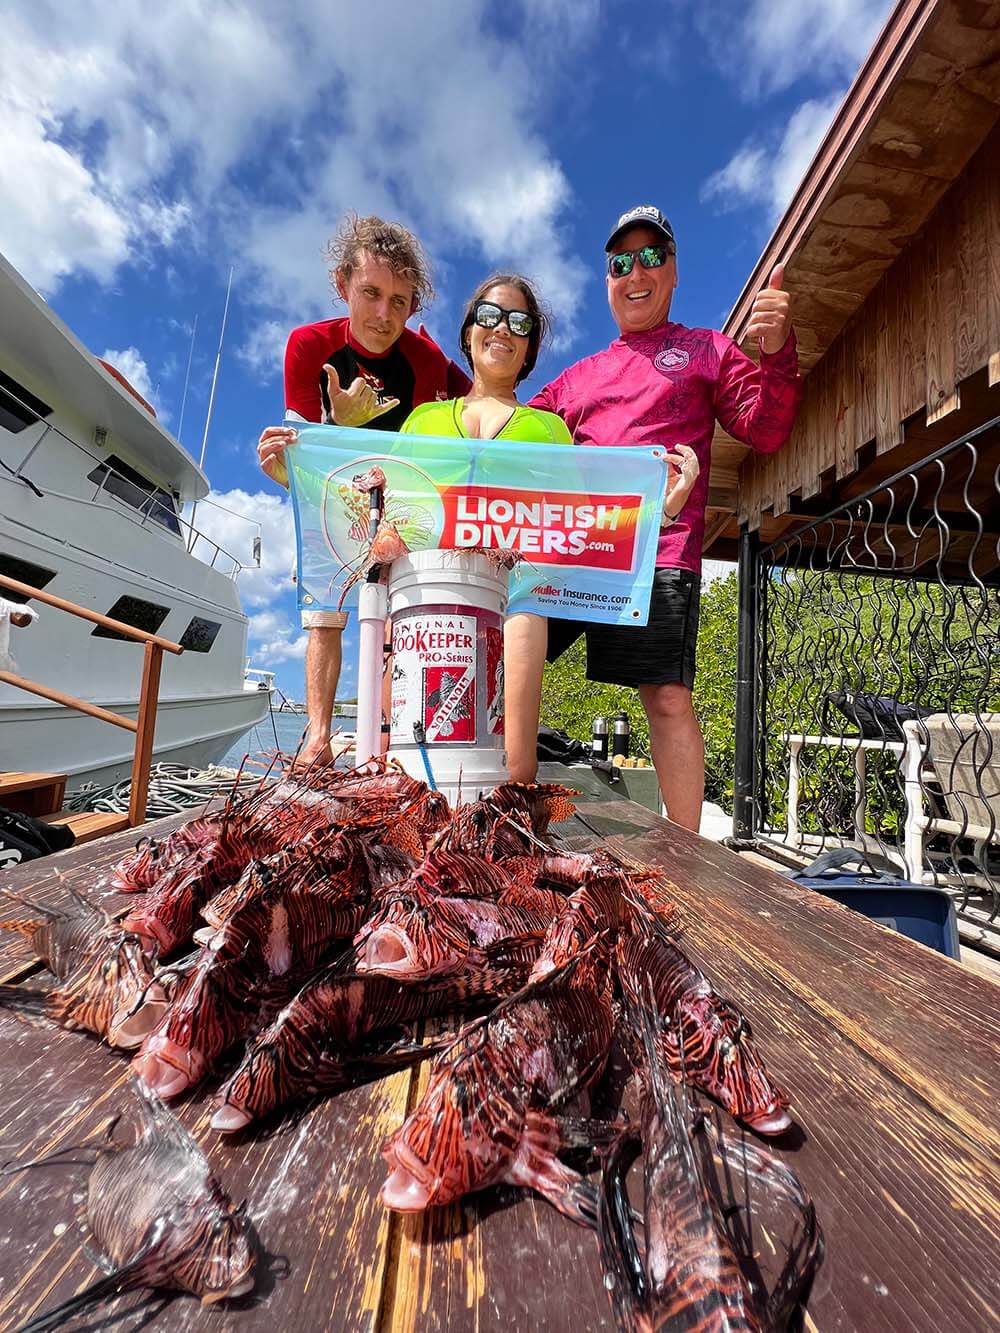 Lukas Moorhead and Roger J. Muller, Jr. with lionfish catch of the day